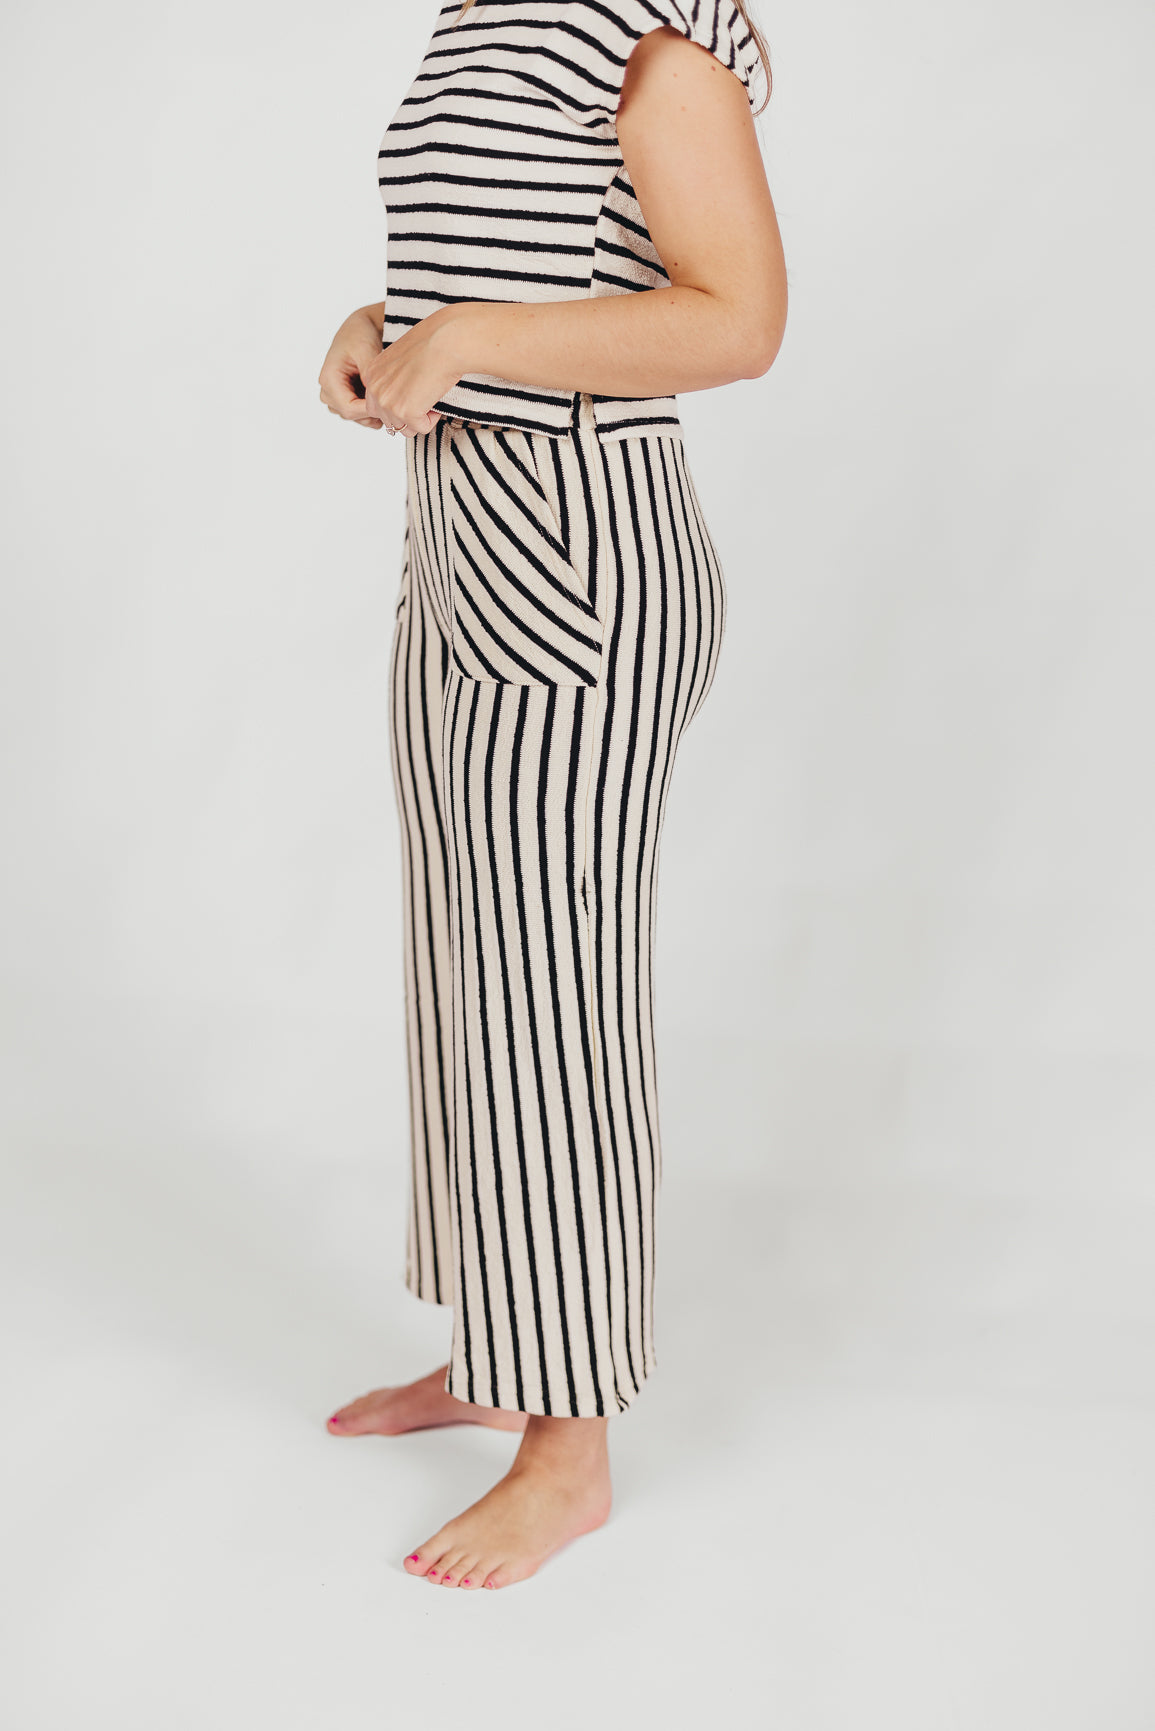 Evie Textured Cotton Top and Pants Set in White/Black